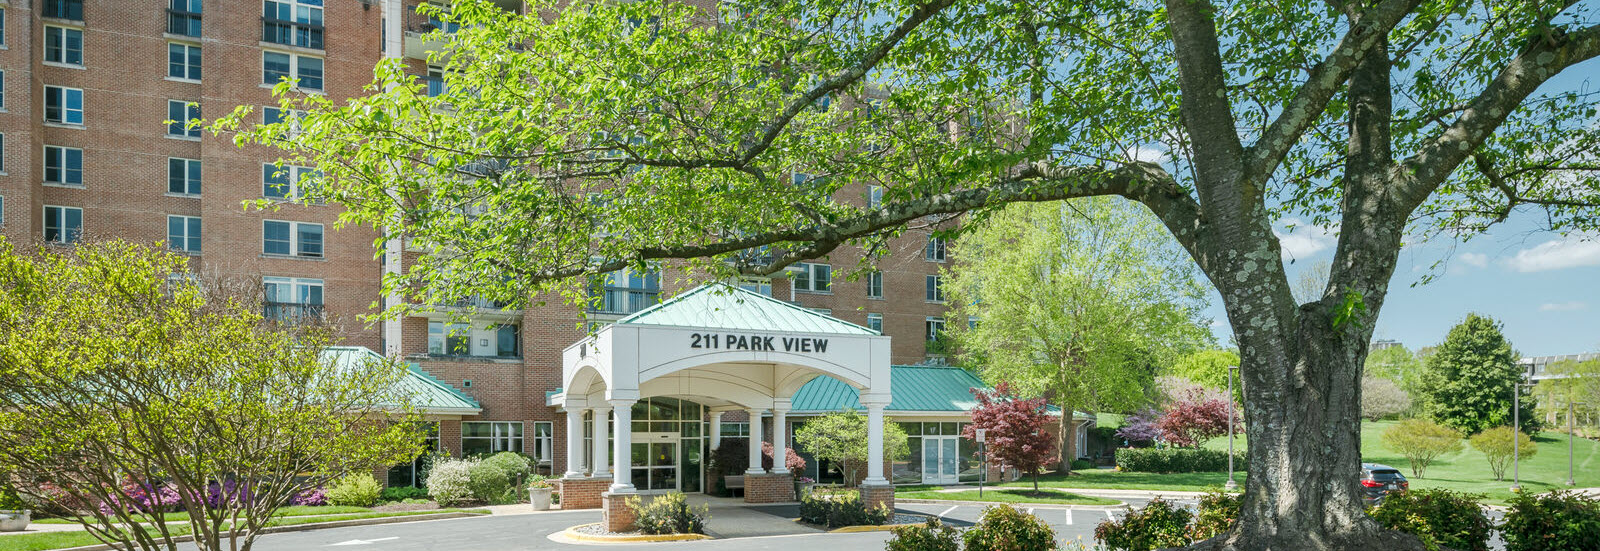 covered entrance to Park View apartments with green lawn and trees in foreground